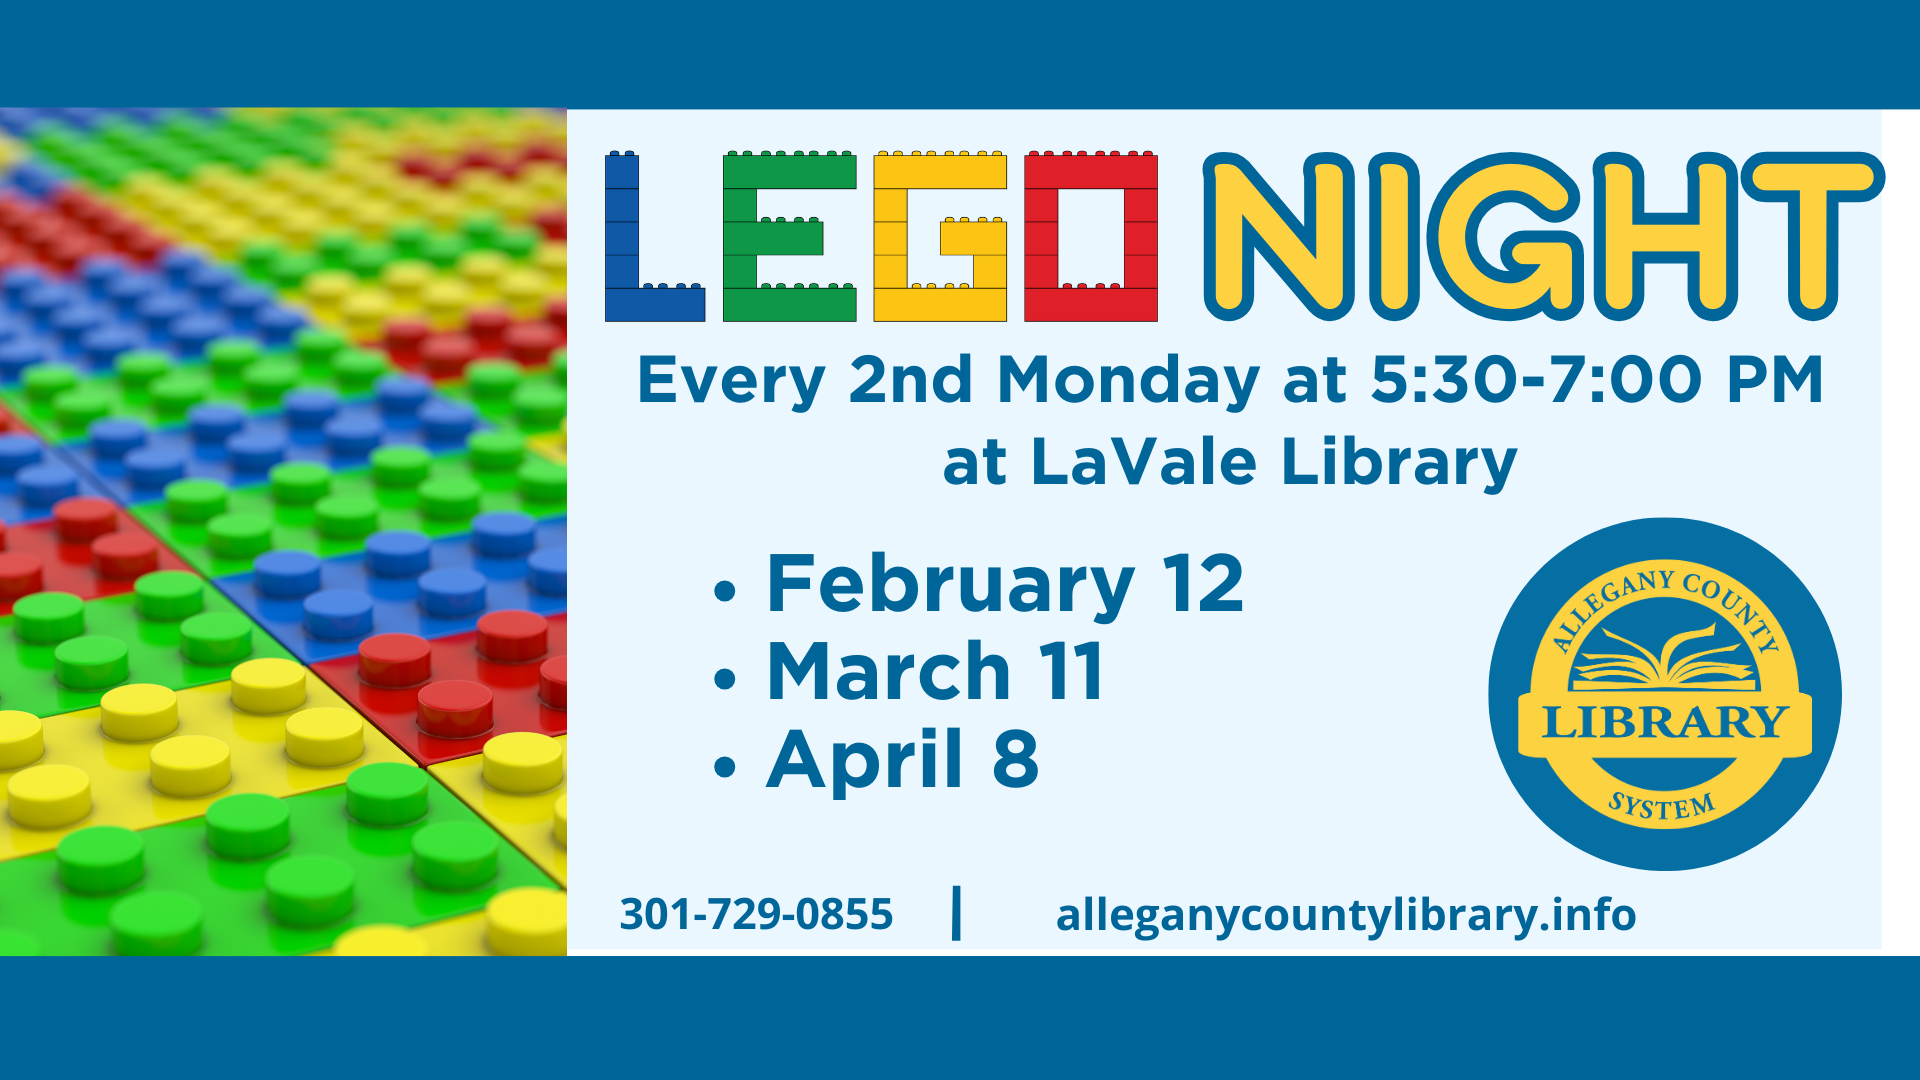 LEGO night flyer with dates and library logo